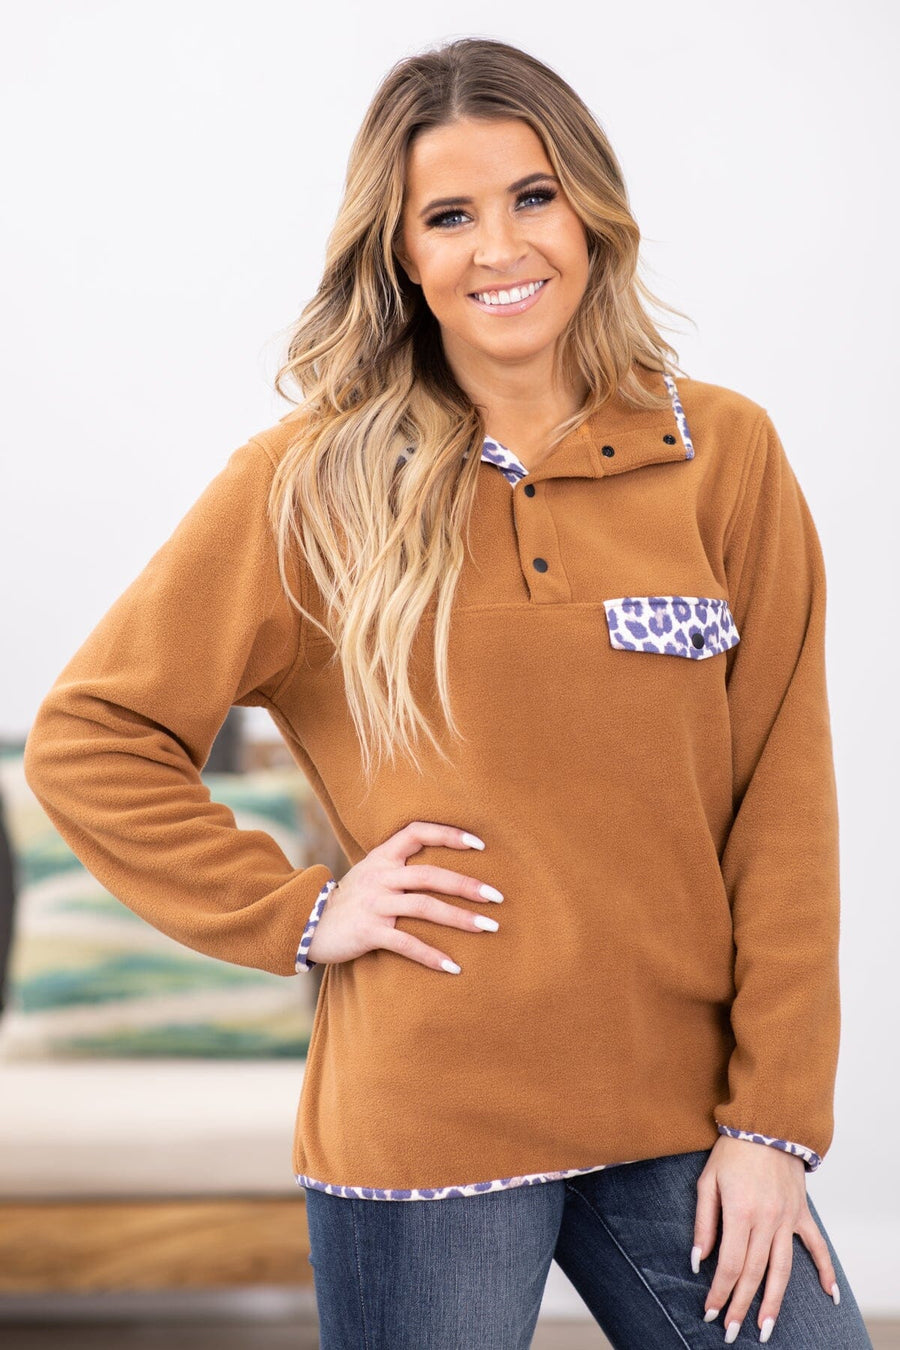 Terra Cotta Contrast Trim 1/4 Snap Pullover - Filly Flair